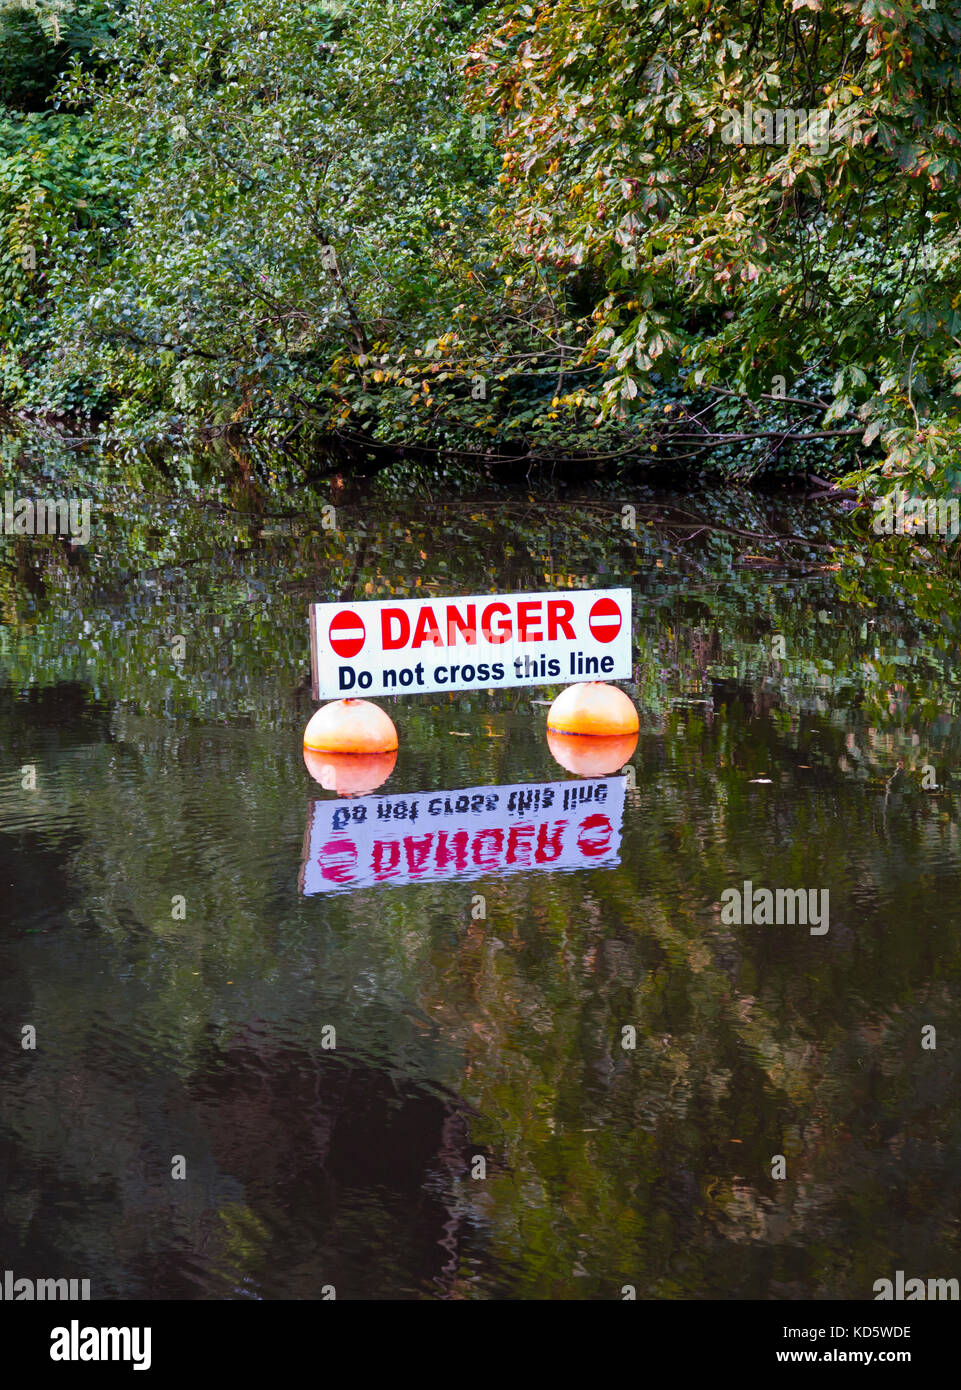 Danger Do Not Cross This Line sign in the River Derwent at Matlock Bath in the Derbyshire Peak District England UK Stock Photo